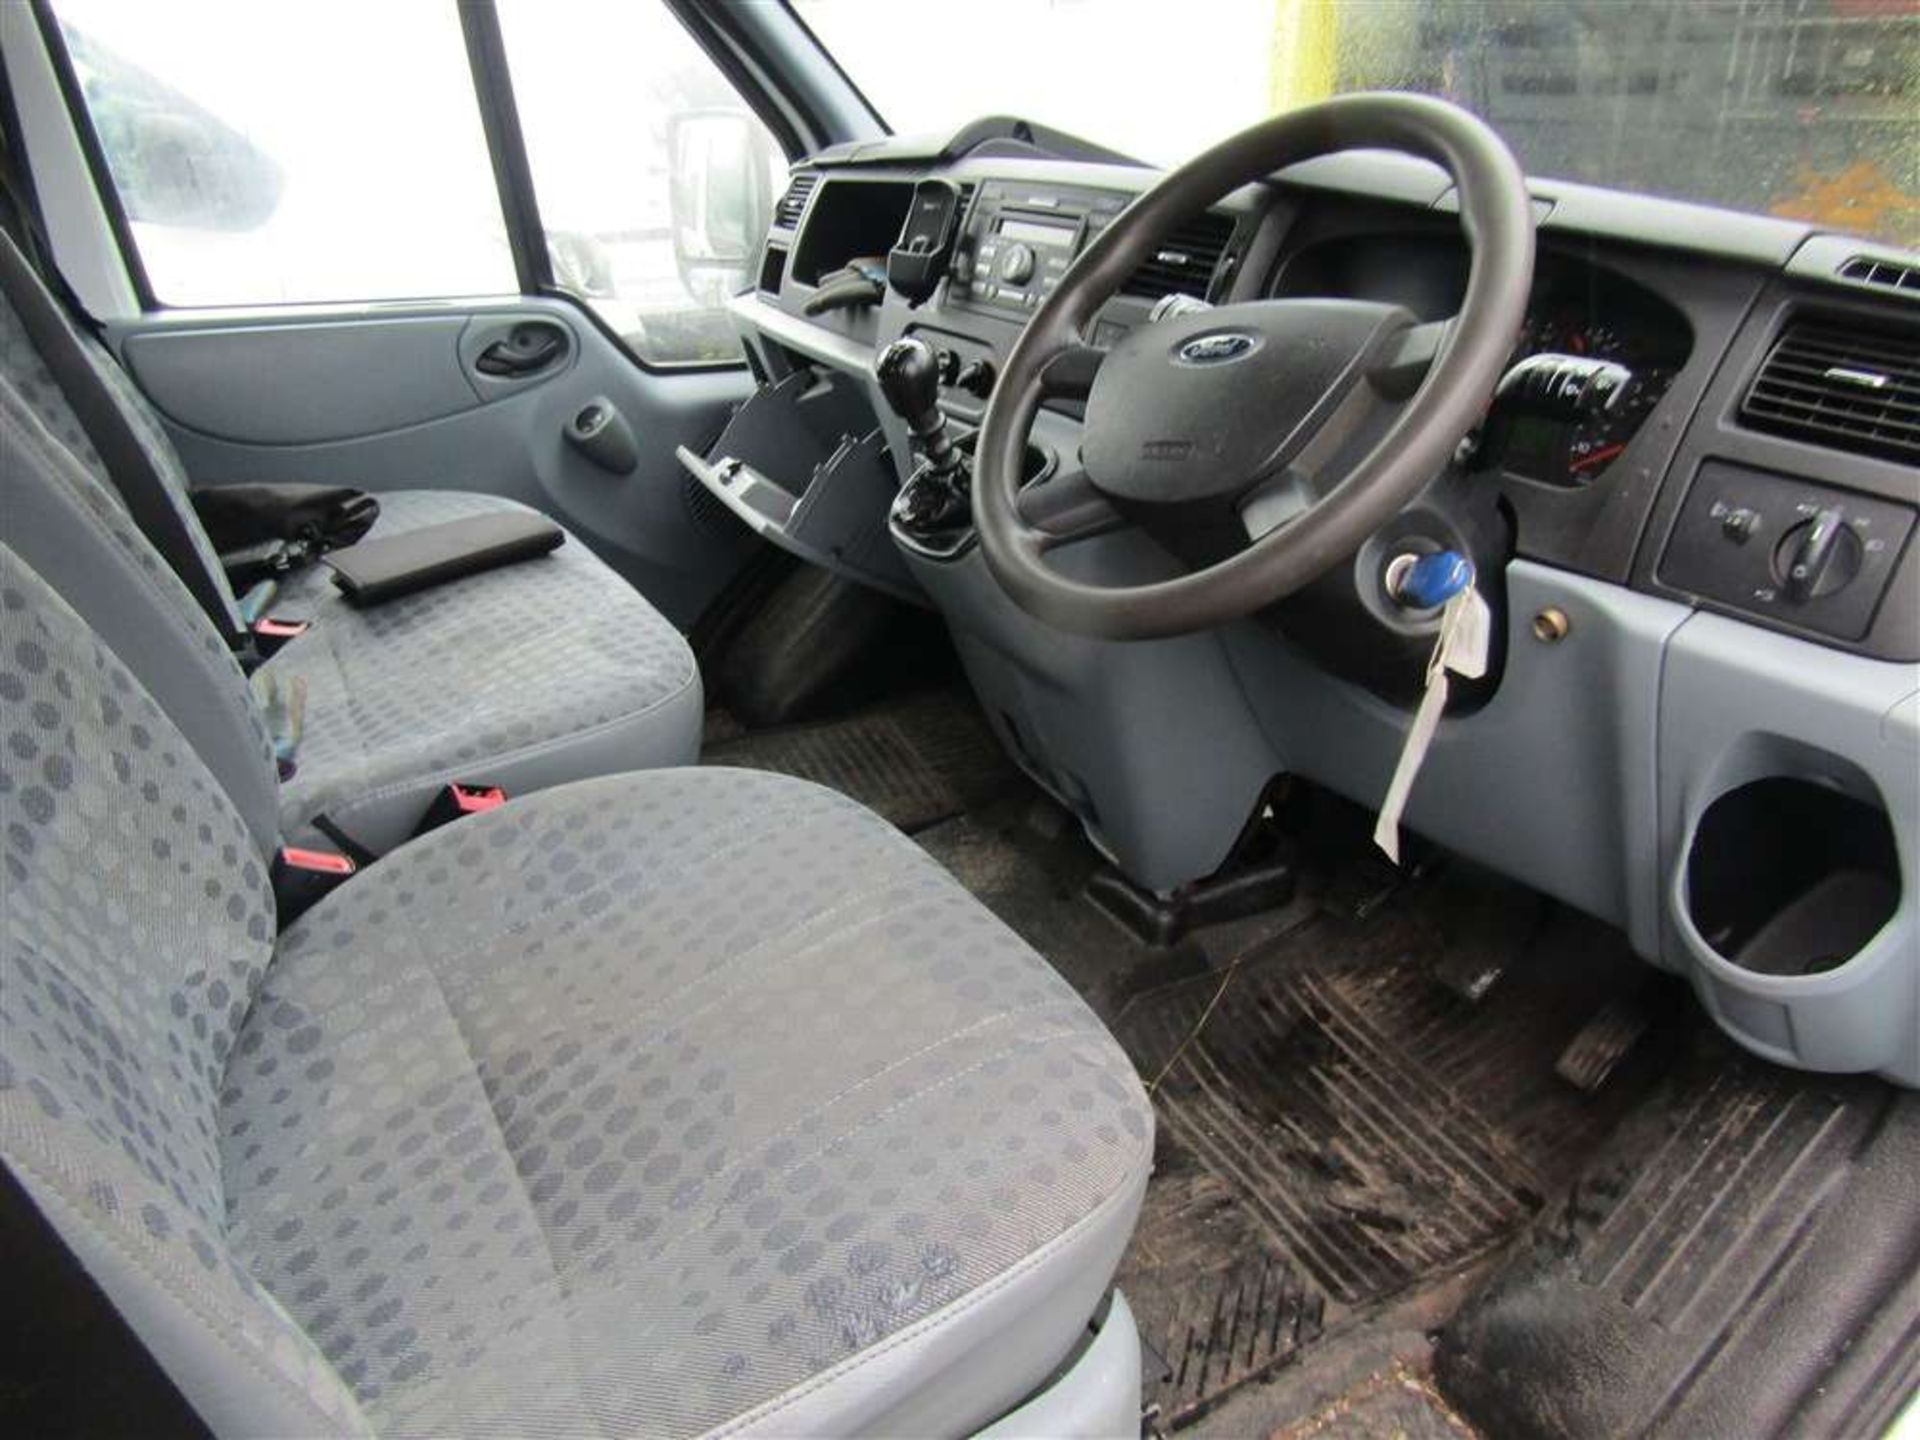 2012 12 reg Ford Transit 155 T350 RWD (Runs But Engine Issues) (Direct UU Water) - Image 5 of 6